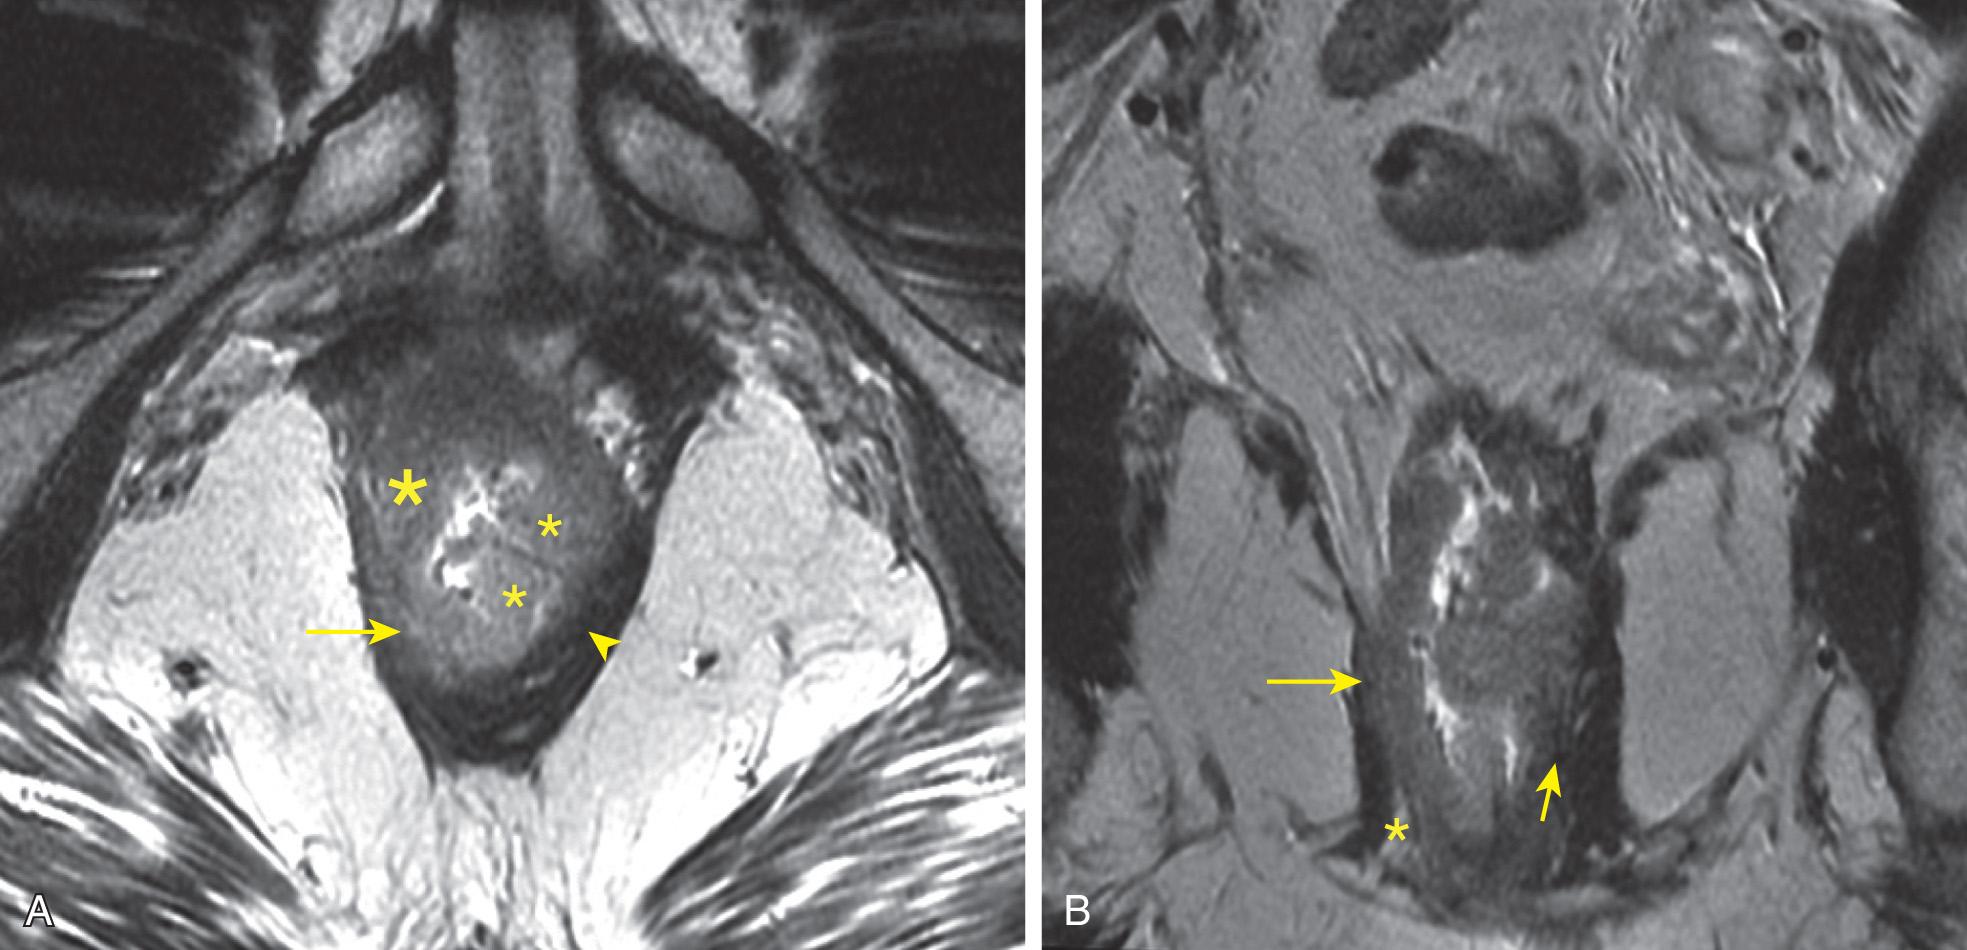 FIGURE 146.6, (A) Axial oblique T2-weighted magnetic resonance image showing a semiannular low rectal tumor arising from the right lateral rectal wall (large asterisk) with large raised rolled edges filling the rectal lumen and converging on the left side of the rectum (small asterisks) . The invasive component on the right invades the internal anal sphincter (arrow) with sparing of the left internal sphincter (arrowhead) . (B) Coronal T2 image showing the intact right intersphincteric plane inferiorly (asterisk) with intermediate signal tumor invading through the right mid- and upper intersphincteric plane into the external anal sphincter (large arrow) . Observe effacement of the normal bright signal of the thin left intersphincteric fat superior to the small arrow . On the basis of intersphincteric plane invasion, this lesion meets criteria for a positive circumferential margin.